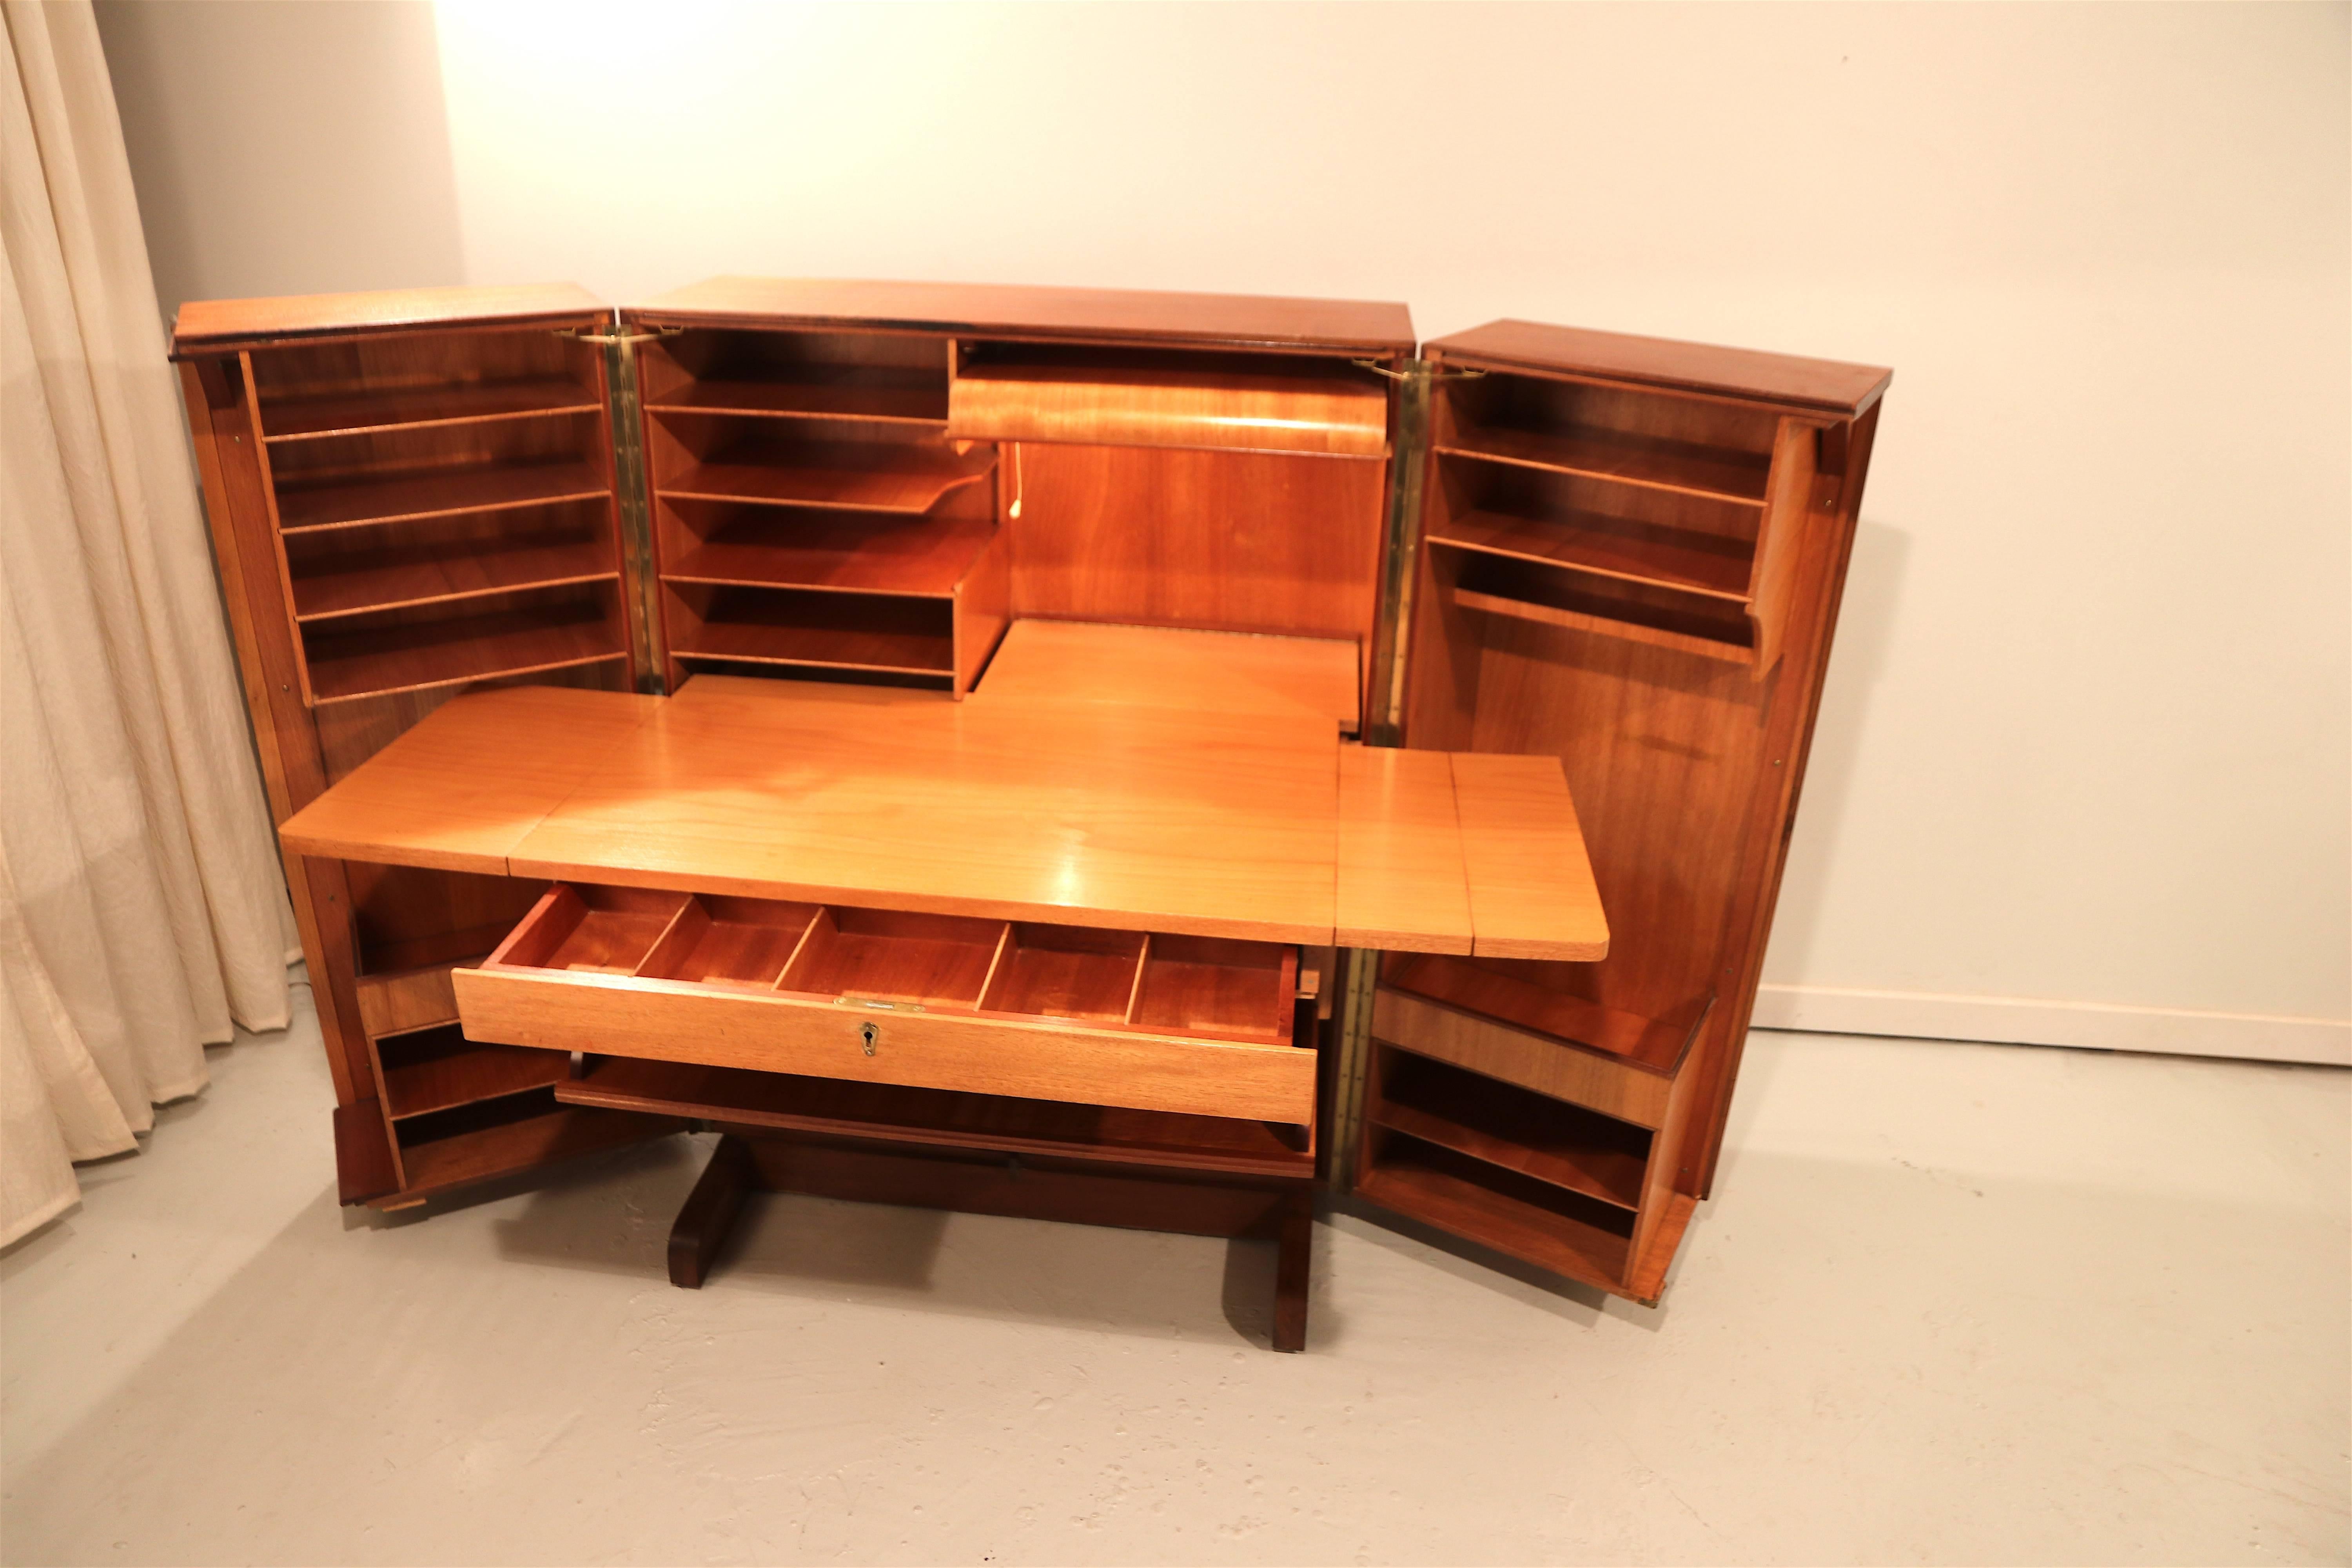 Mummenthaler and Meier Magic Box, Desk in a Box Closable Work Station In Excellent Condition For Sale In Amsterdam, NL